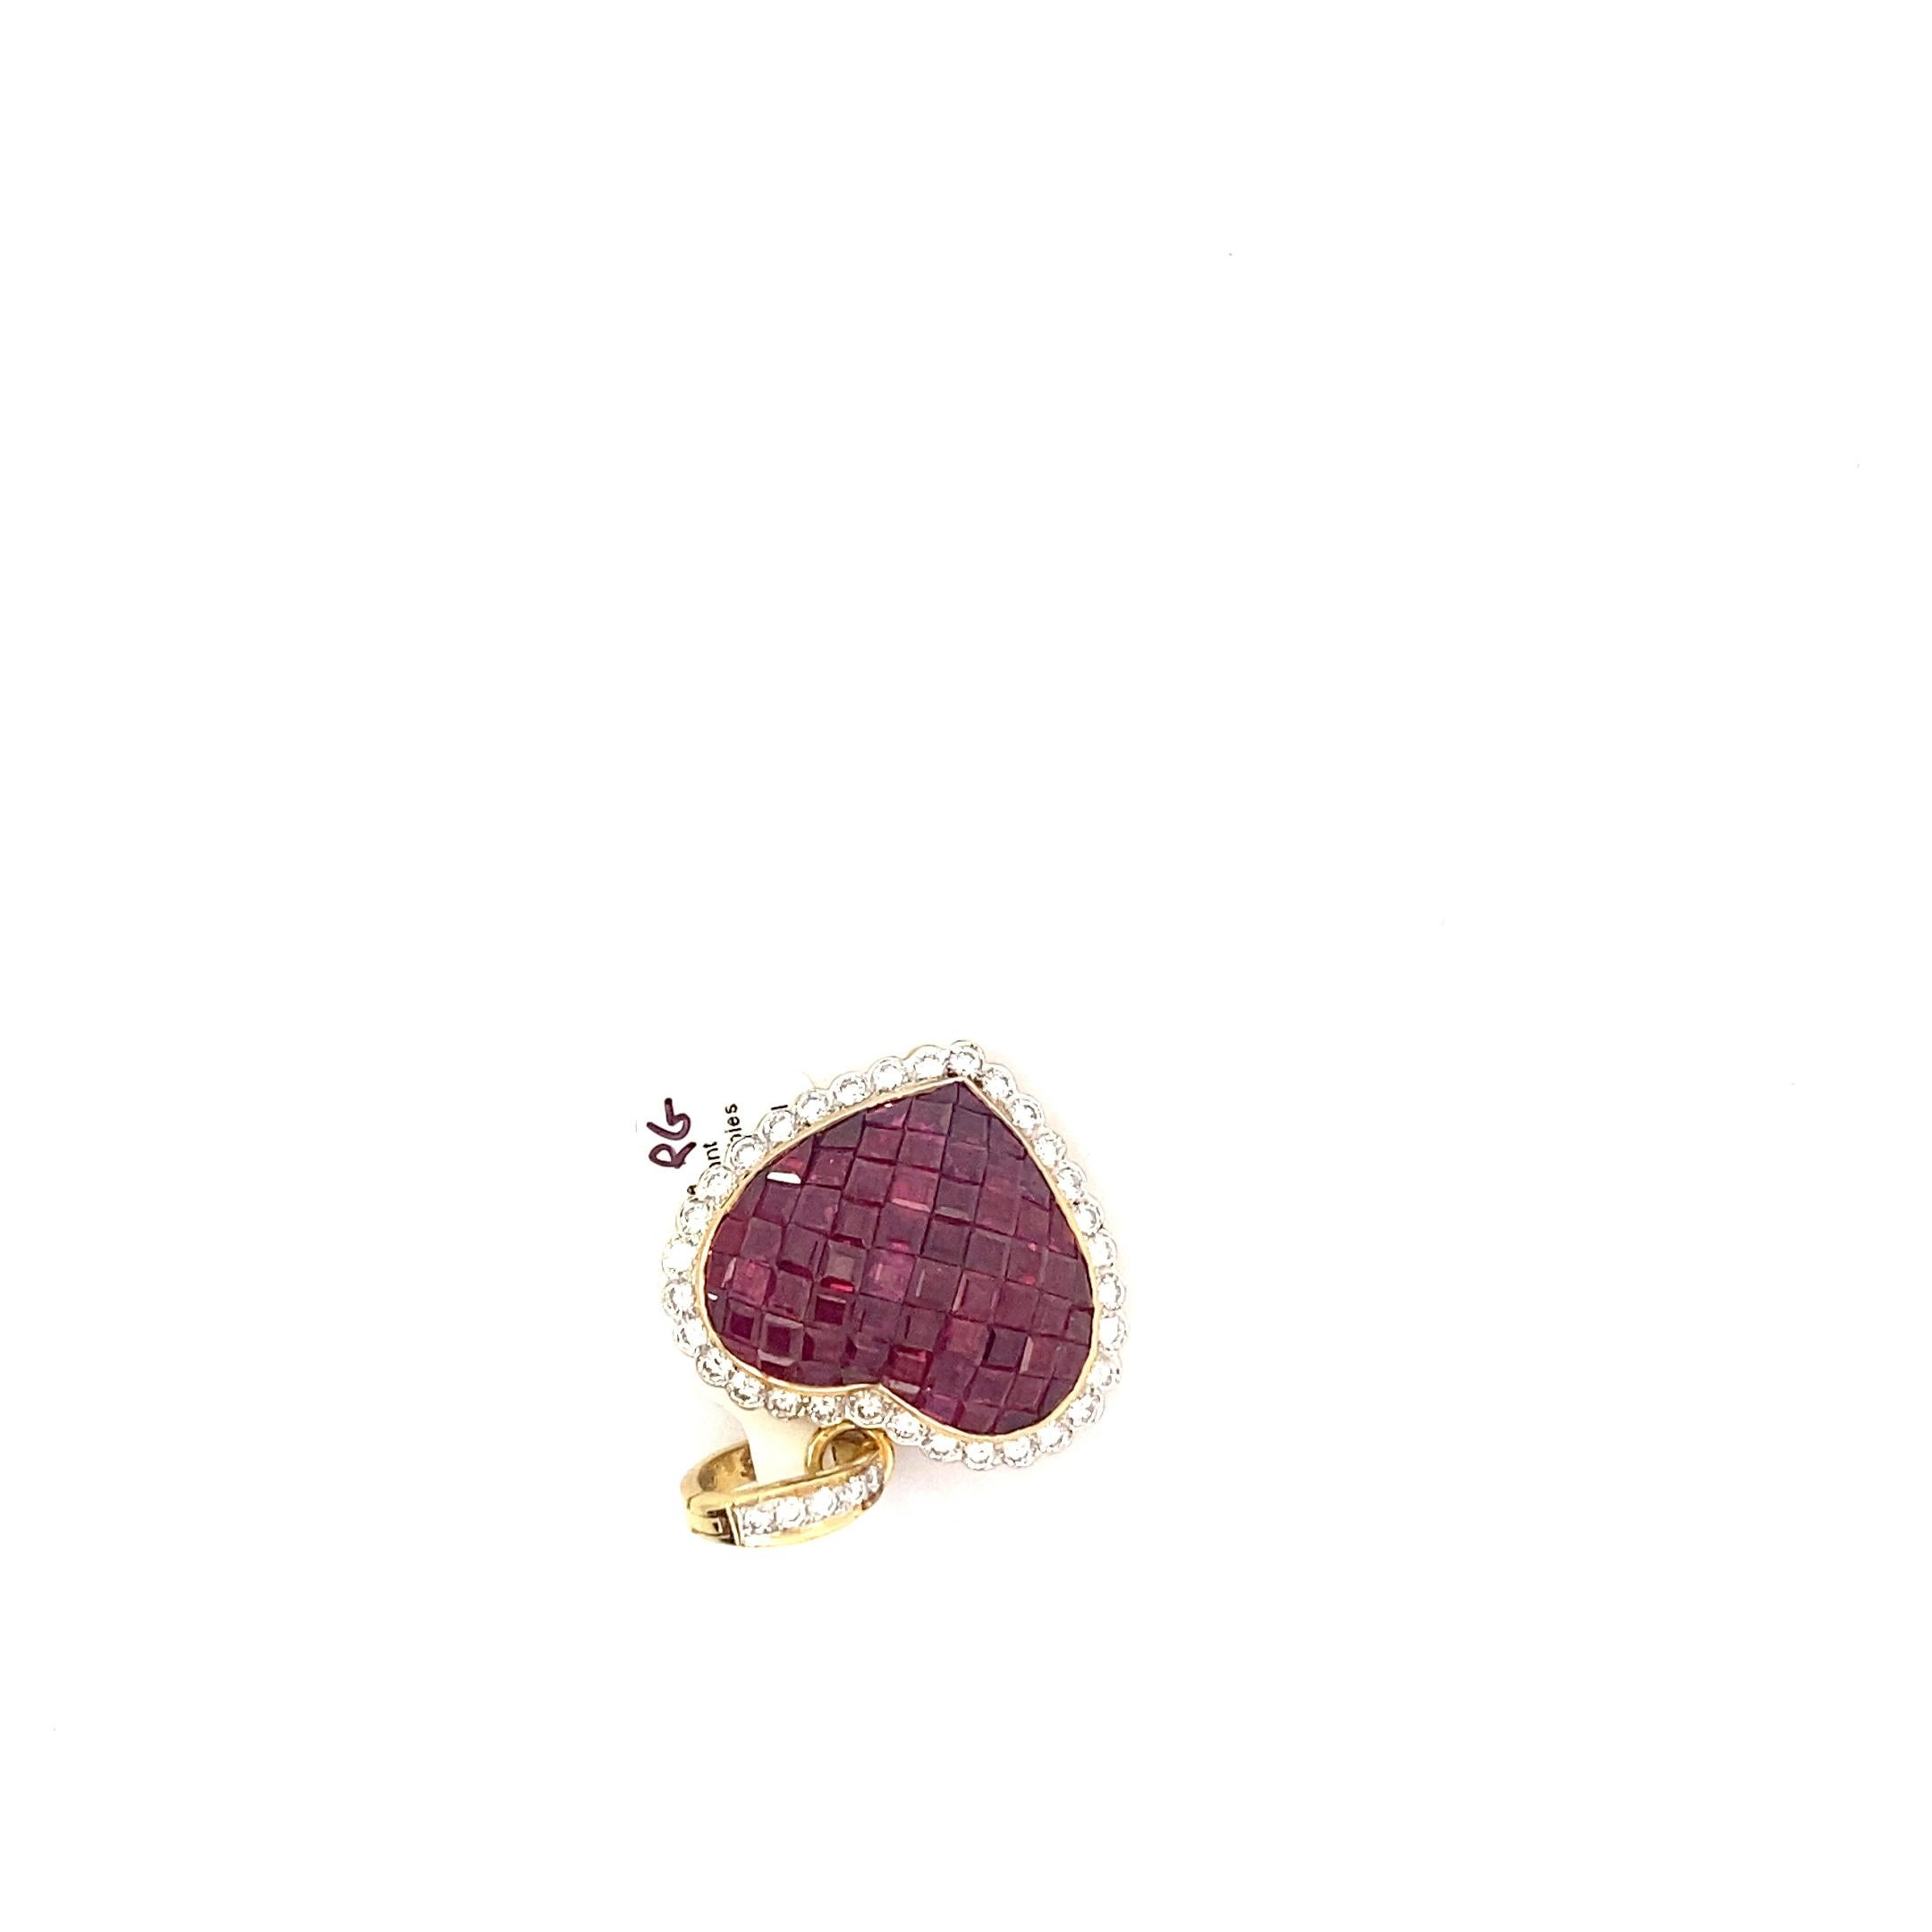 This gorgeous and weighty vintage pendant features dozens of step cut rubies shaping the heart. These rubies are a deliciously dark color with a deep purple undertone. Framing the luxe mosaic of rubies is a border of sparkly bezel set round